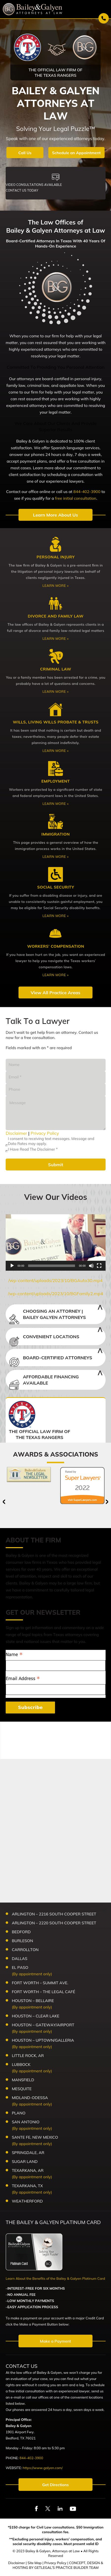 Bailey & Galyen, Attorneys at Law - Plano TX Lawyers